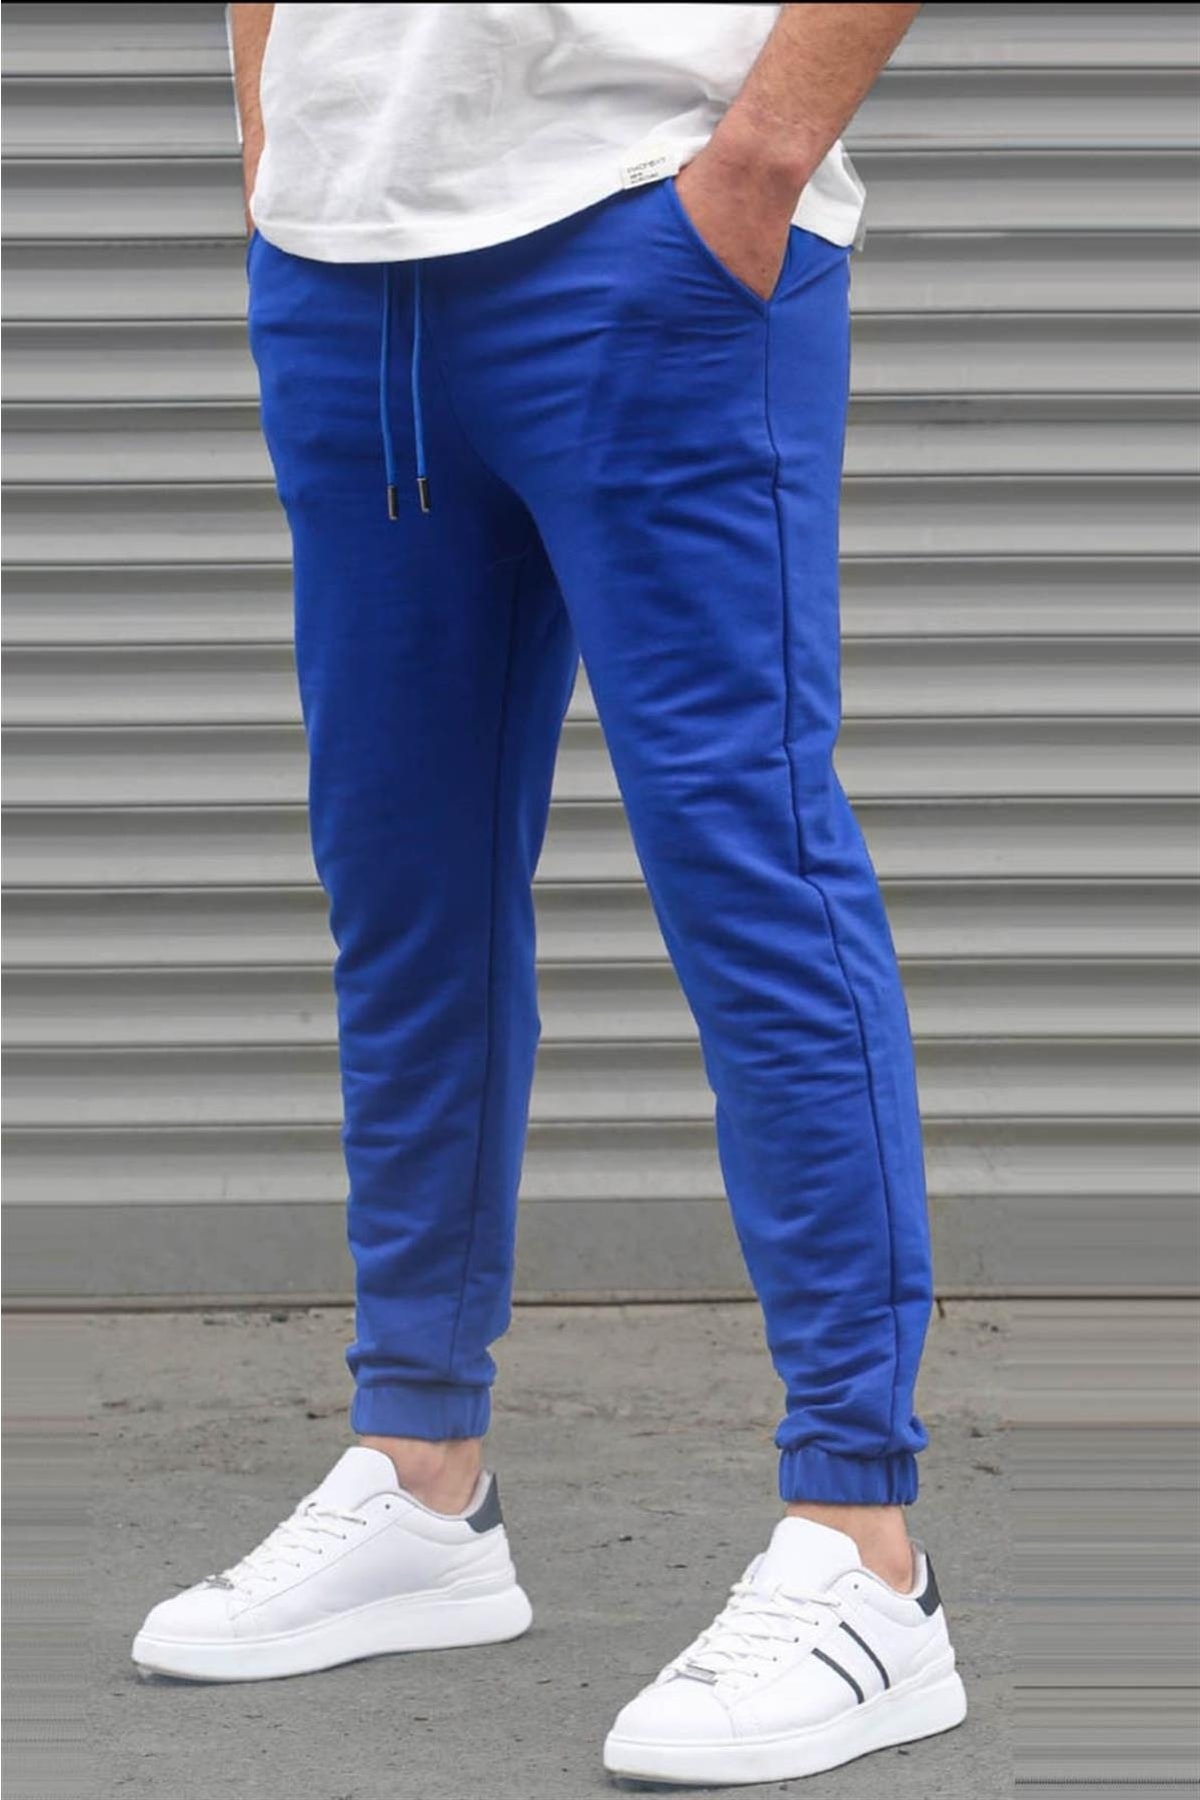 Madmext Sax Basic Men's Tracksuit with Elastic Legs 5494